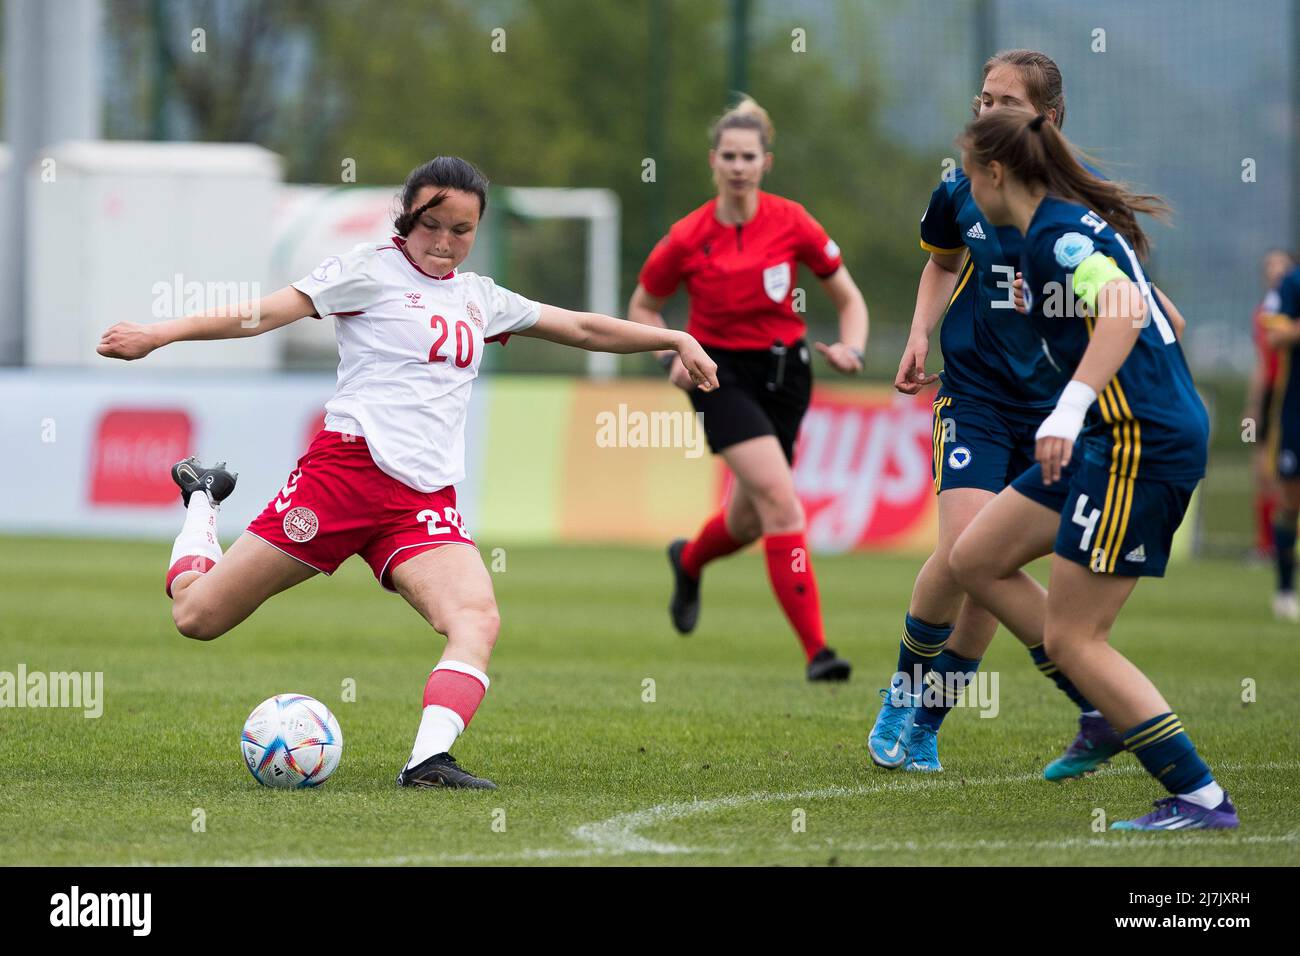 Zenica, Bosnia and Herzegovina, 6th May 2022. Alma Aagaard of Denmark in action during the UEFA Women's Under-17 Championship 2022 match between Bosnia Herzegovina v Denmark at FF BH Training Centre in Zenica, Bosnia and Herzegovina. May 6, 2022. Credit: Nikola Krstic/Alamy Stock Photo